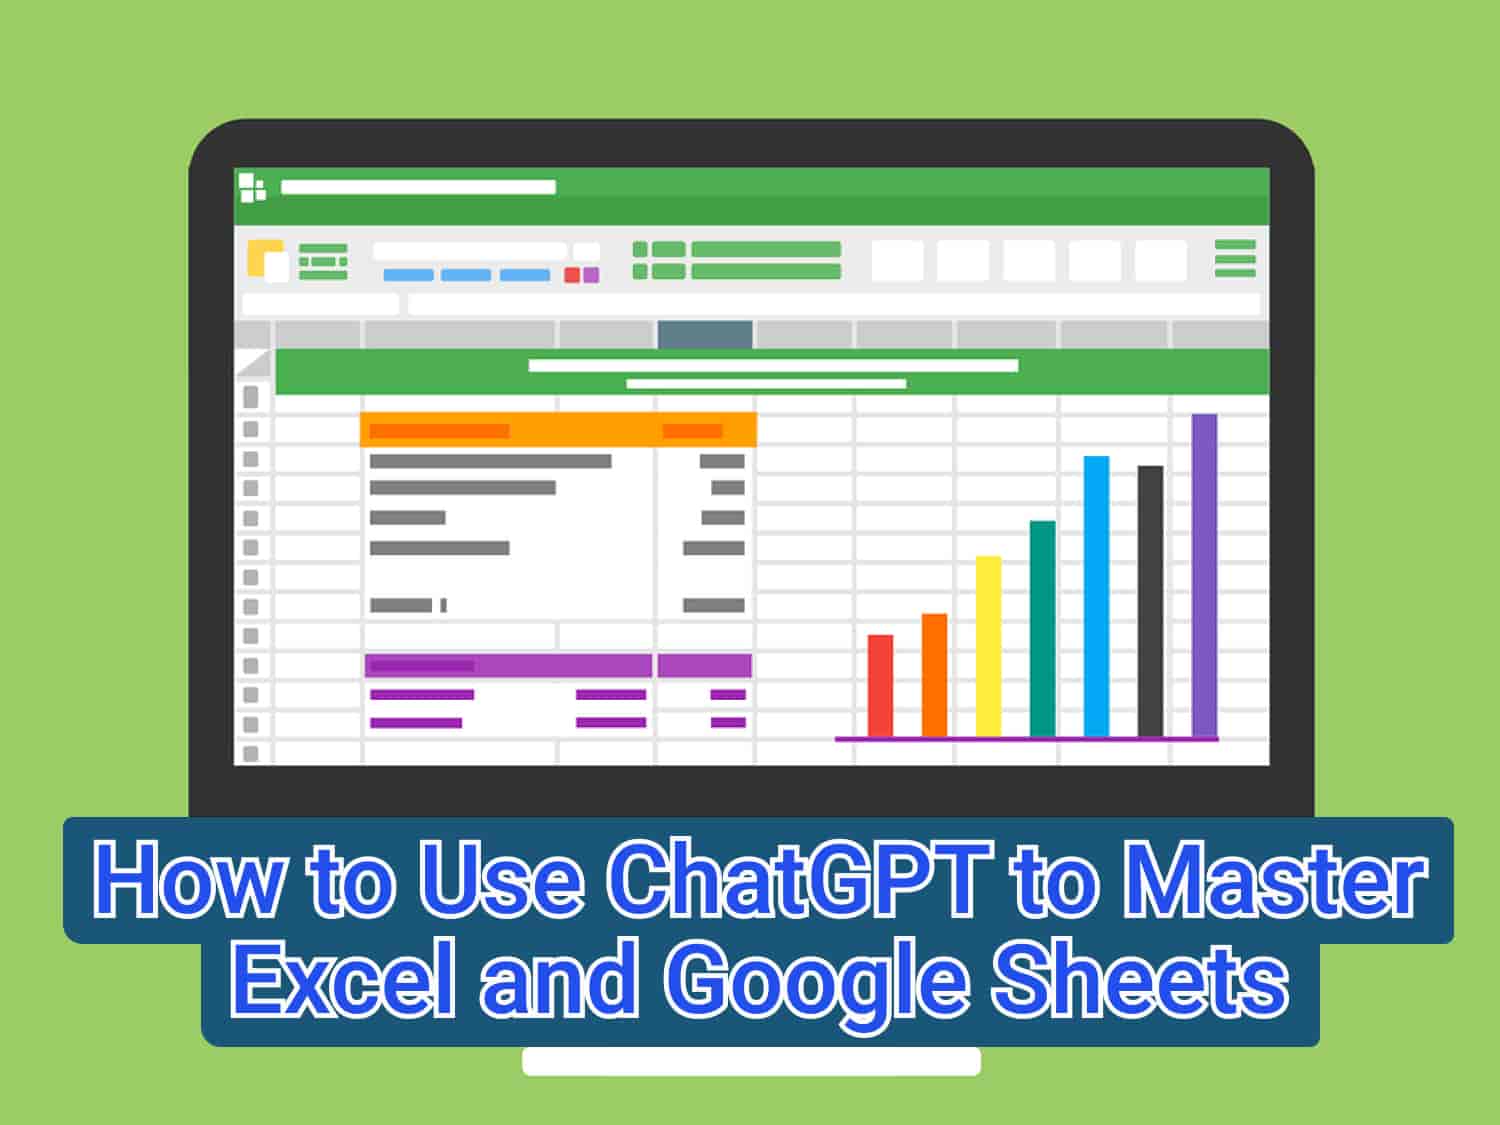 How to use ChatGPT to master Excel and Google Sheets